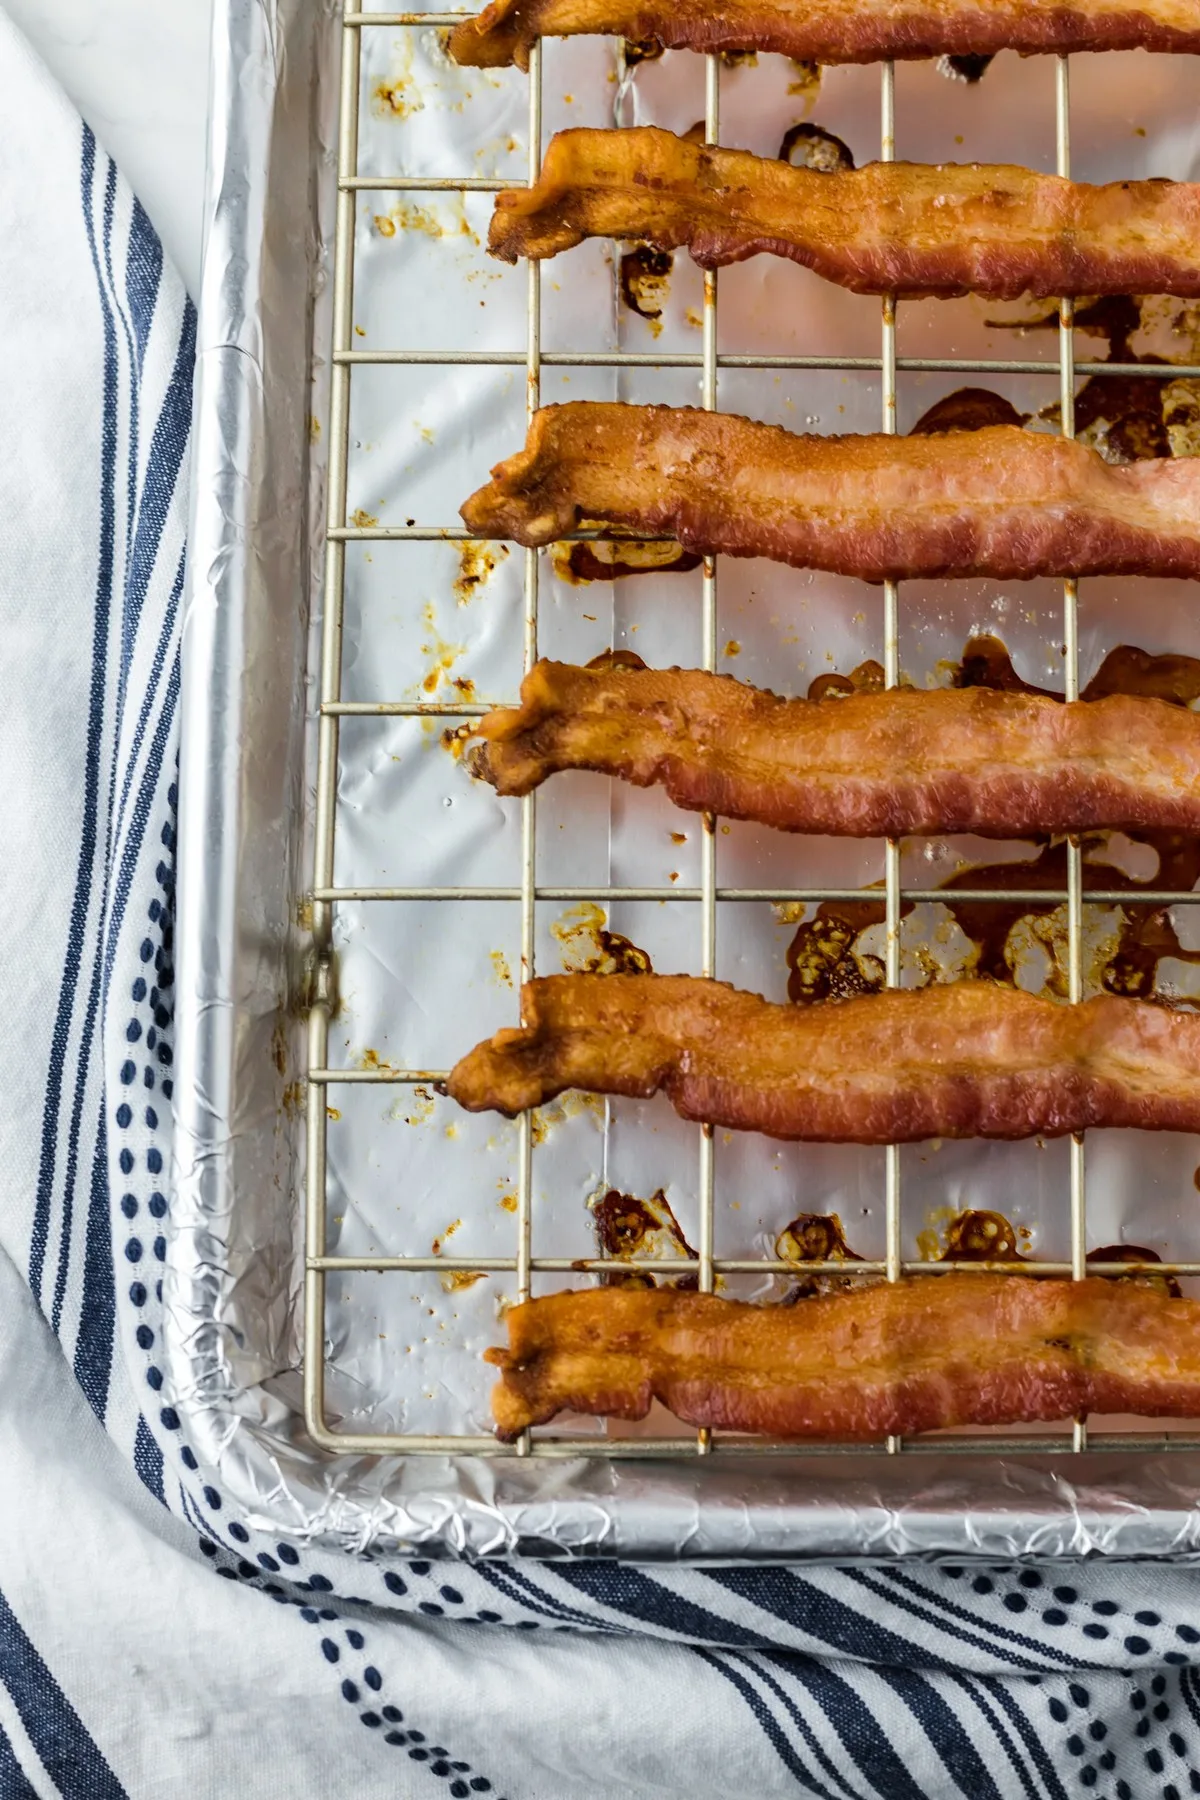 https://www.southerncravings.com/wp-content/uploads/2020/04/Oven-Baked-Bacon-6.jpg.webp